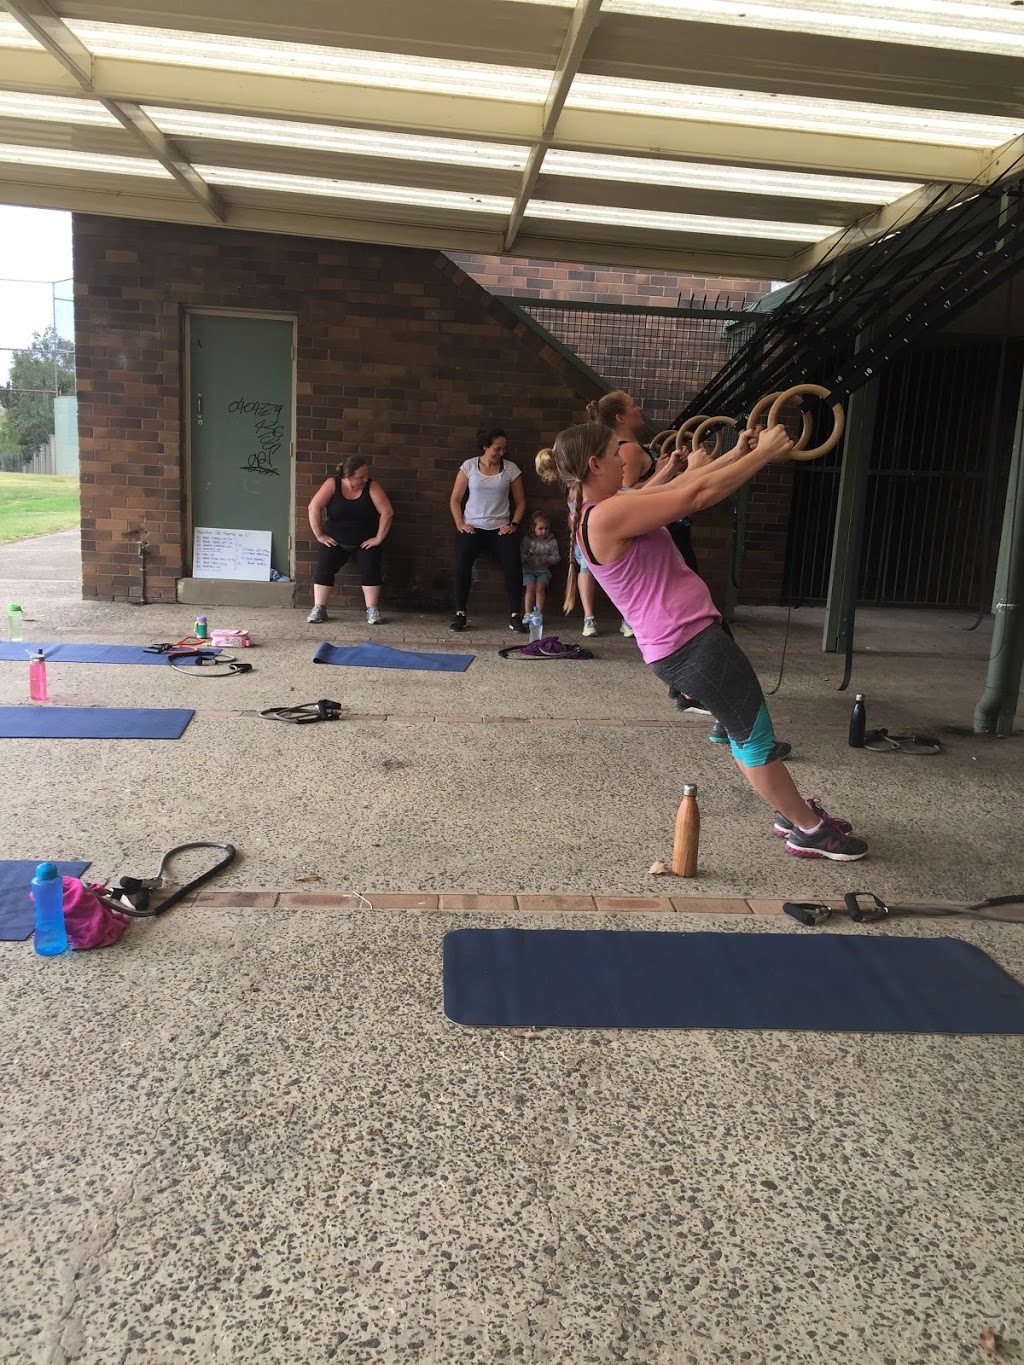 Naked Health Personal Training | Peter Depena Reserve, Dolls Point NSW 2219, Australia | Phone: 0449 178 070